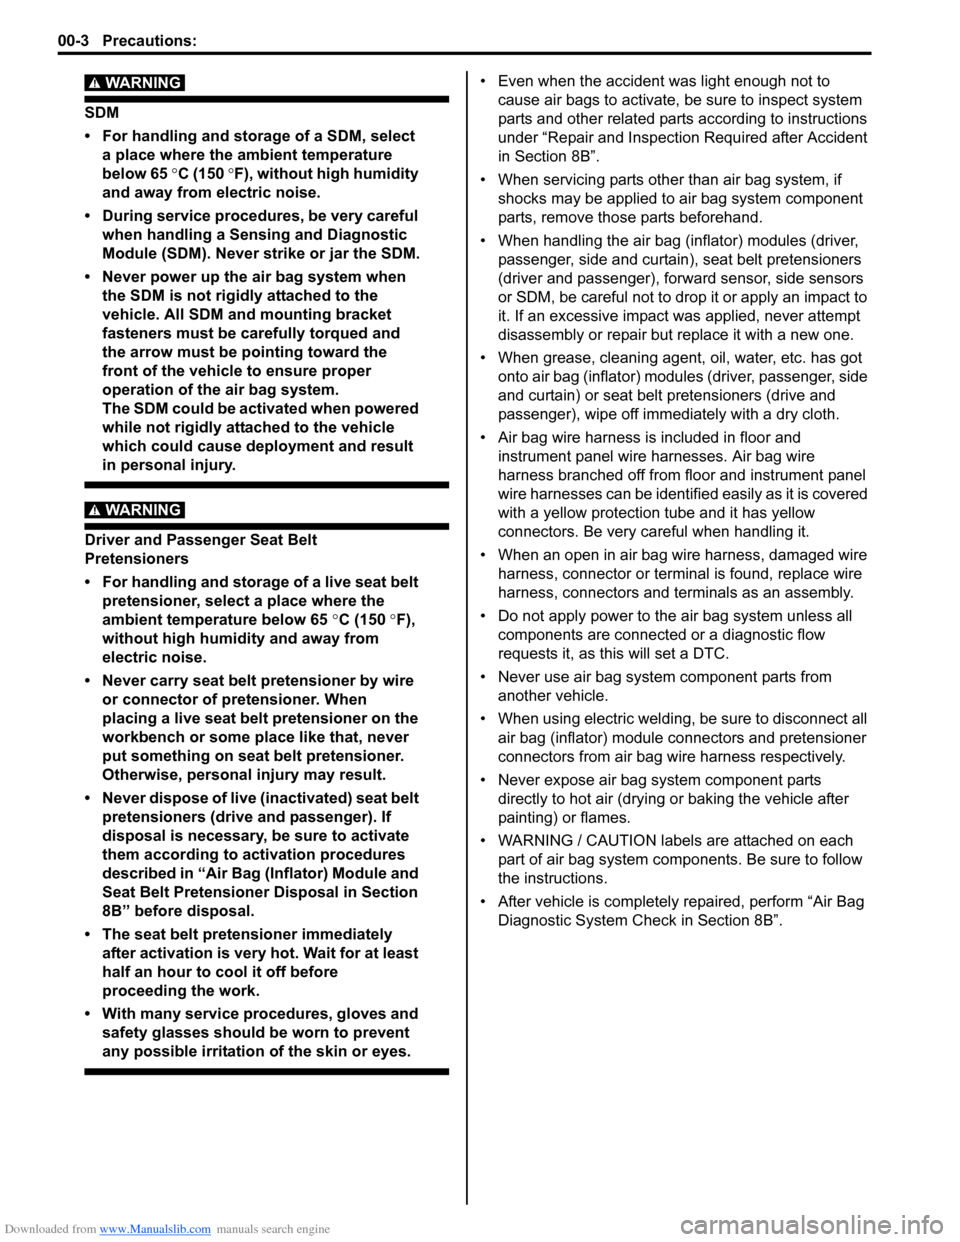 SUZUKI SWIFT 2008 2.G Service Workshop Manual Downloaded from www.Manualslib.com manuals search engine 00-3 Precautions: 
WARNING! 
SDM
• For handling and storage of a SDM, select a place where the ambient temperature 
below 65  °C (150  °F),